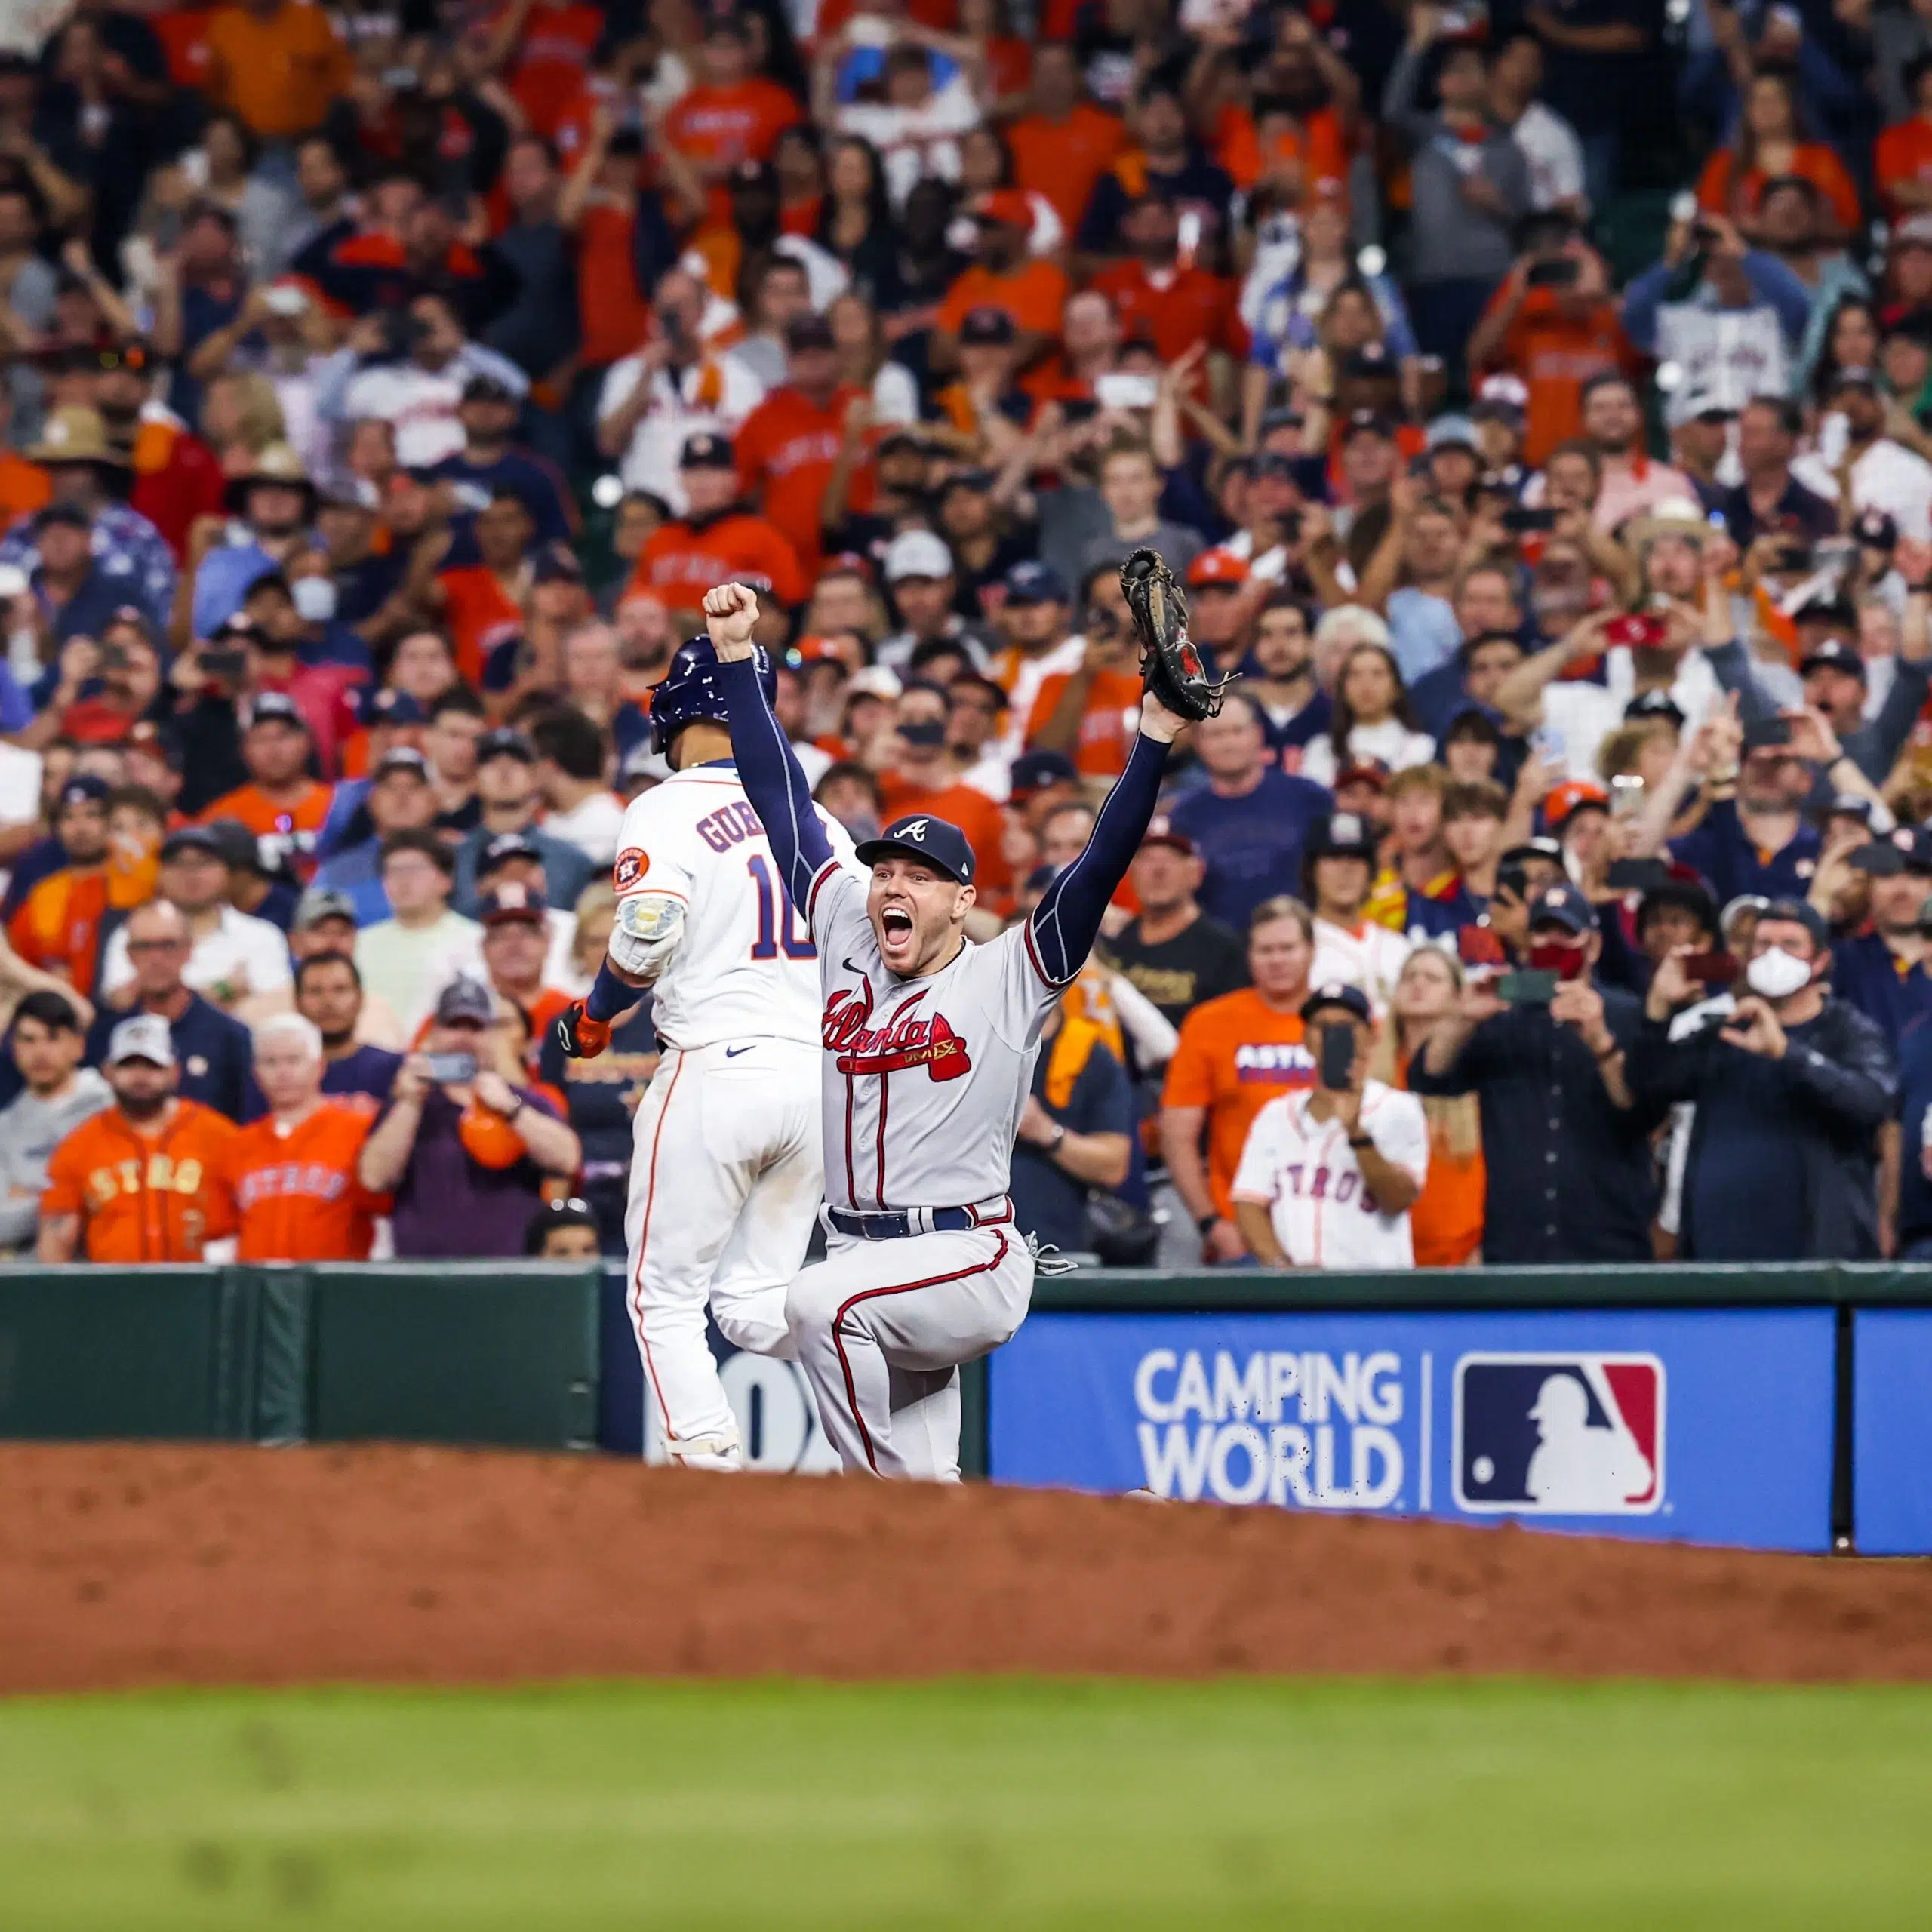 Braves take World Series for first time in 26 years